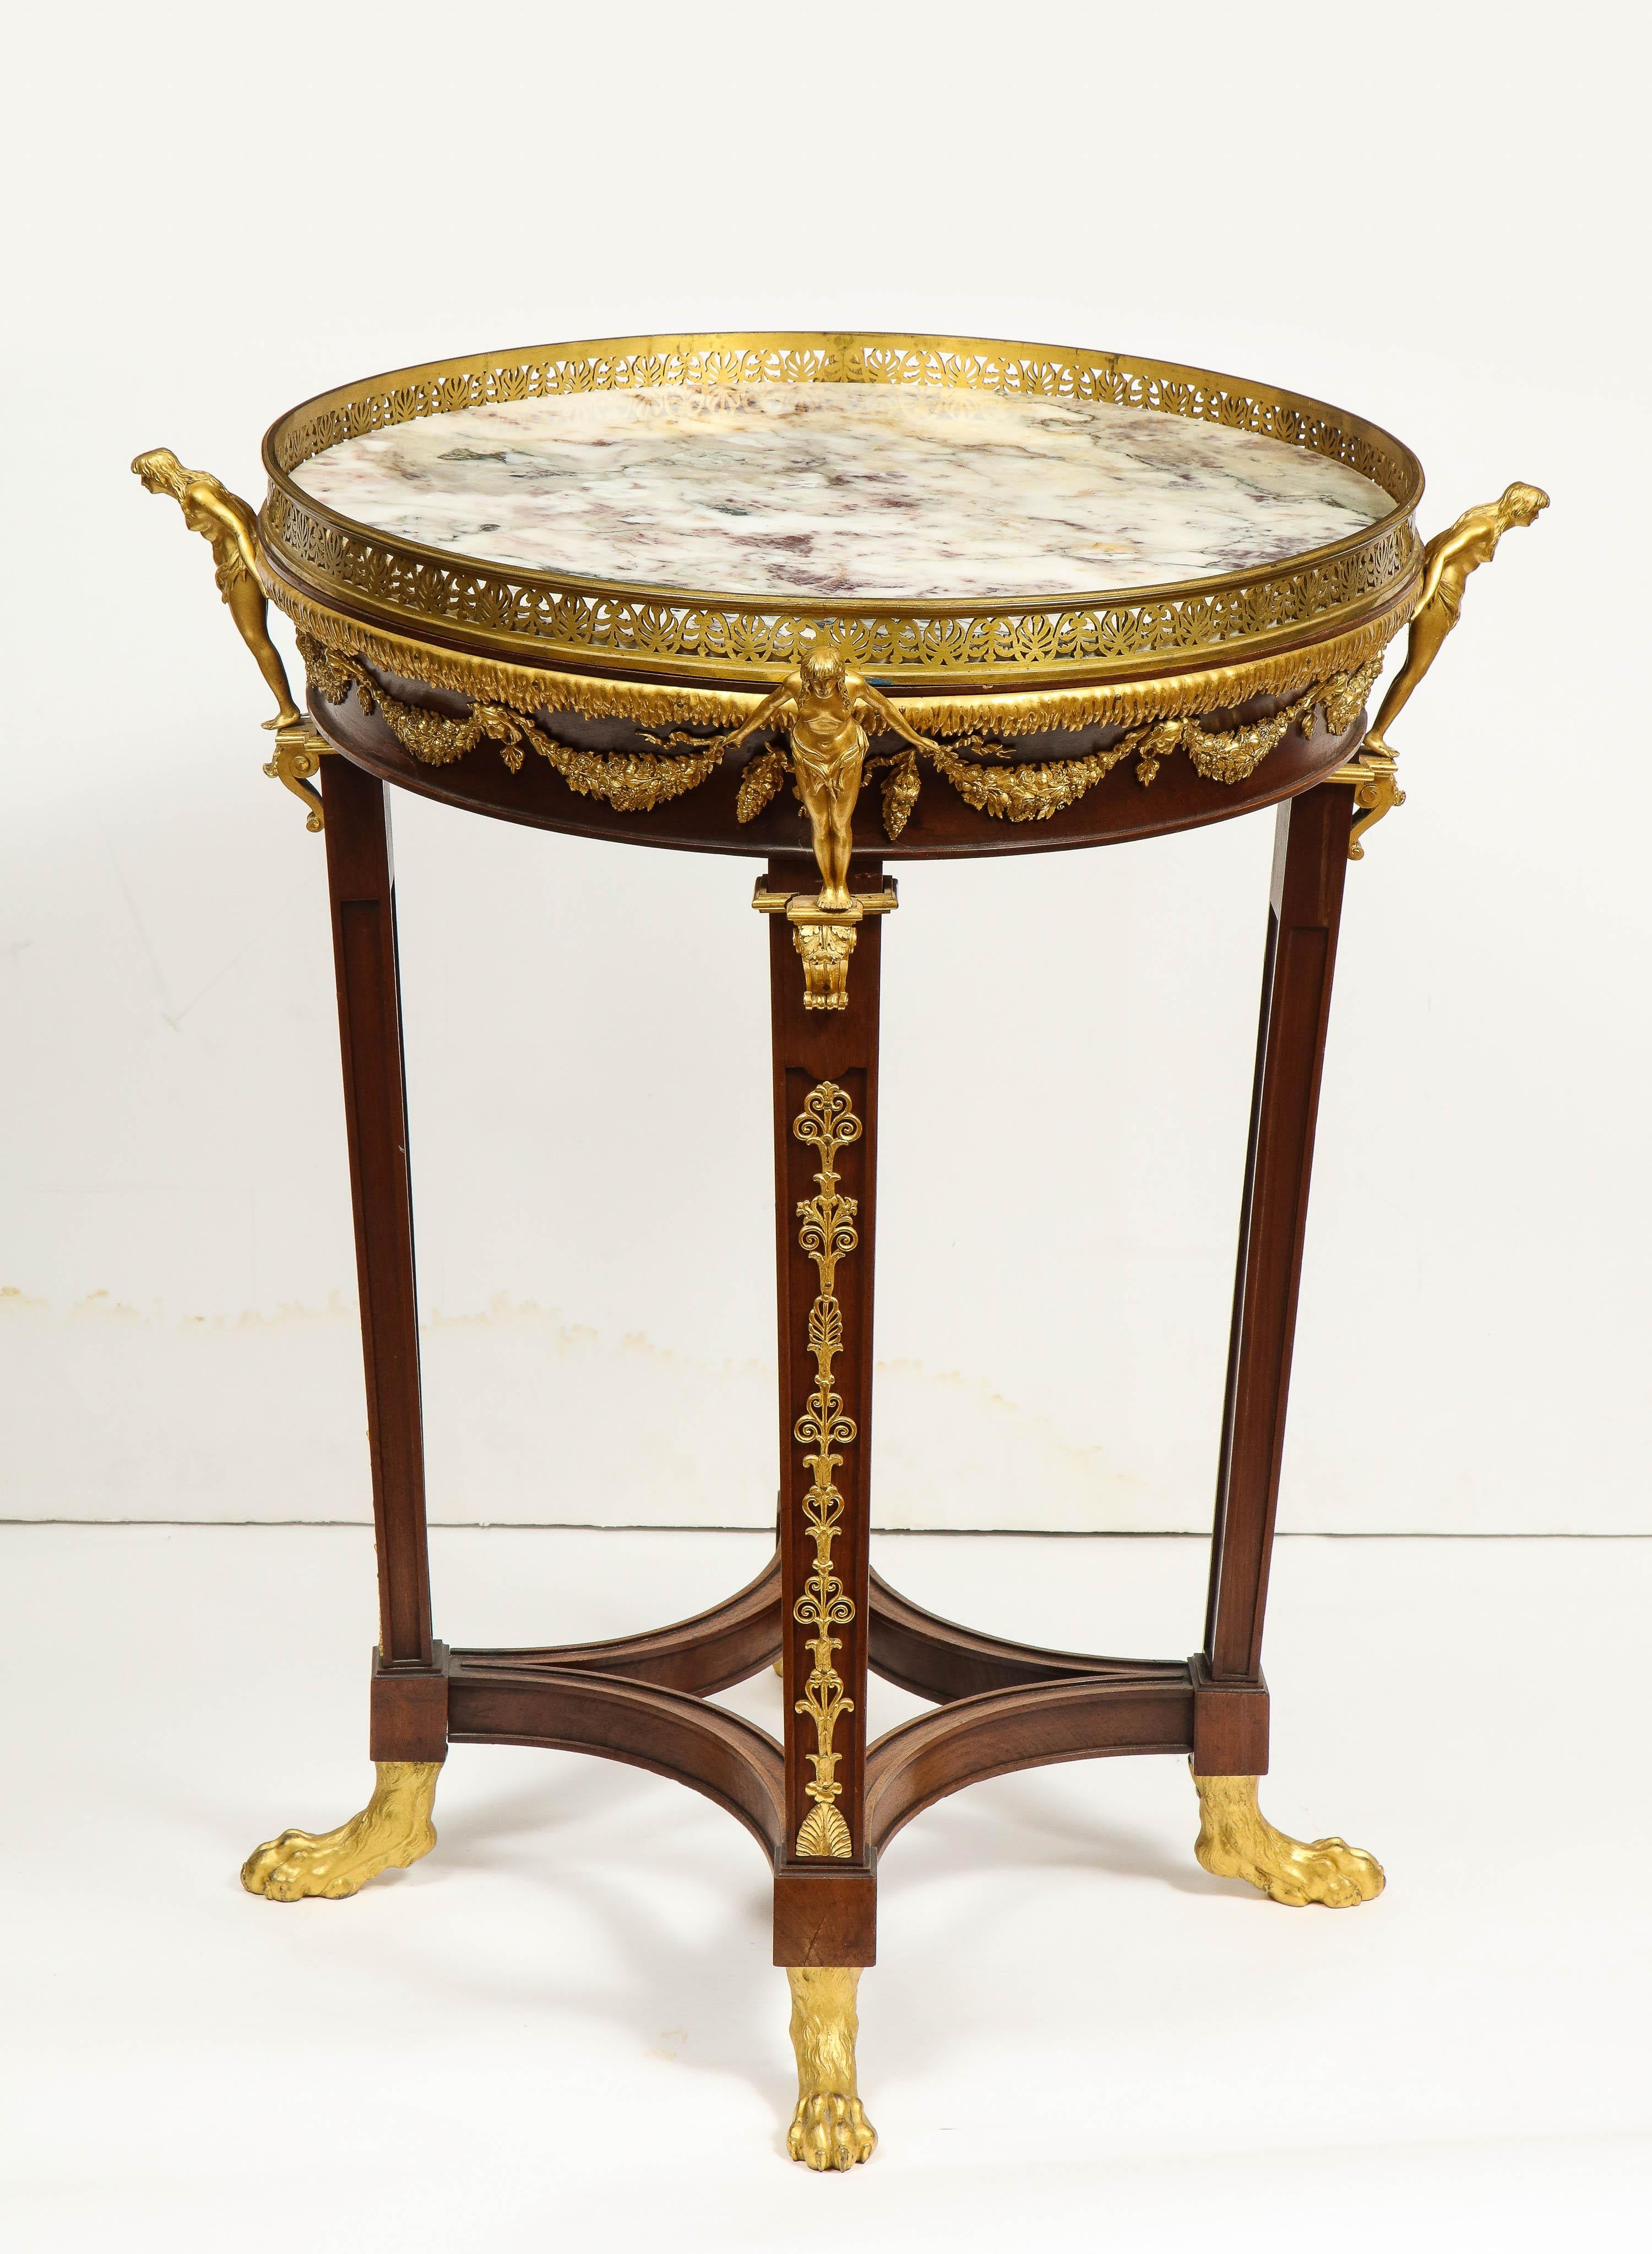 Extremely Fine Russian Empire Ormolu Mounted Mahogany Center Table For Sale 8